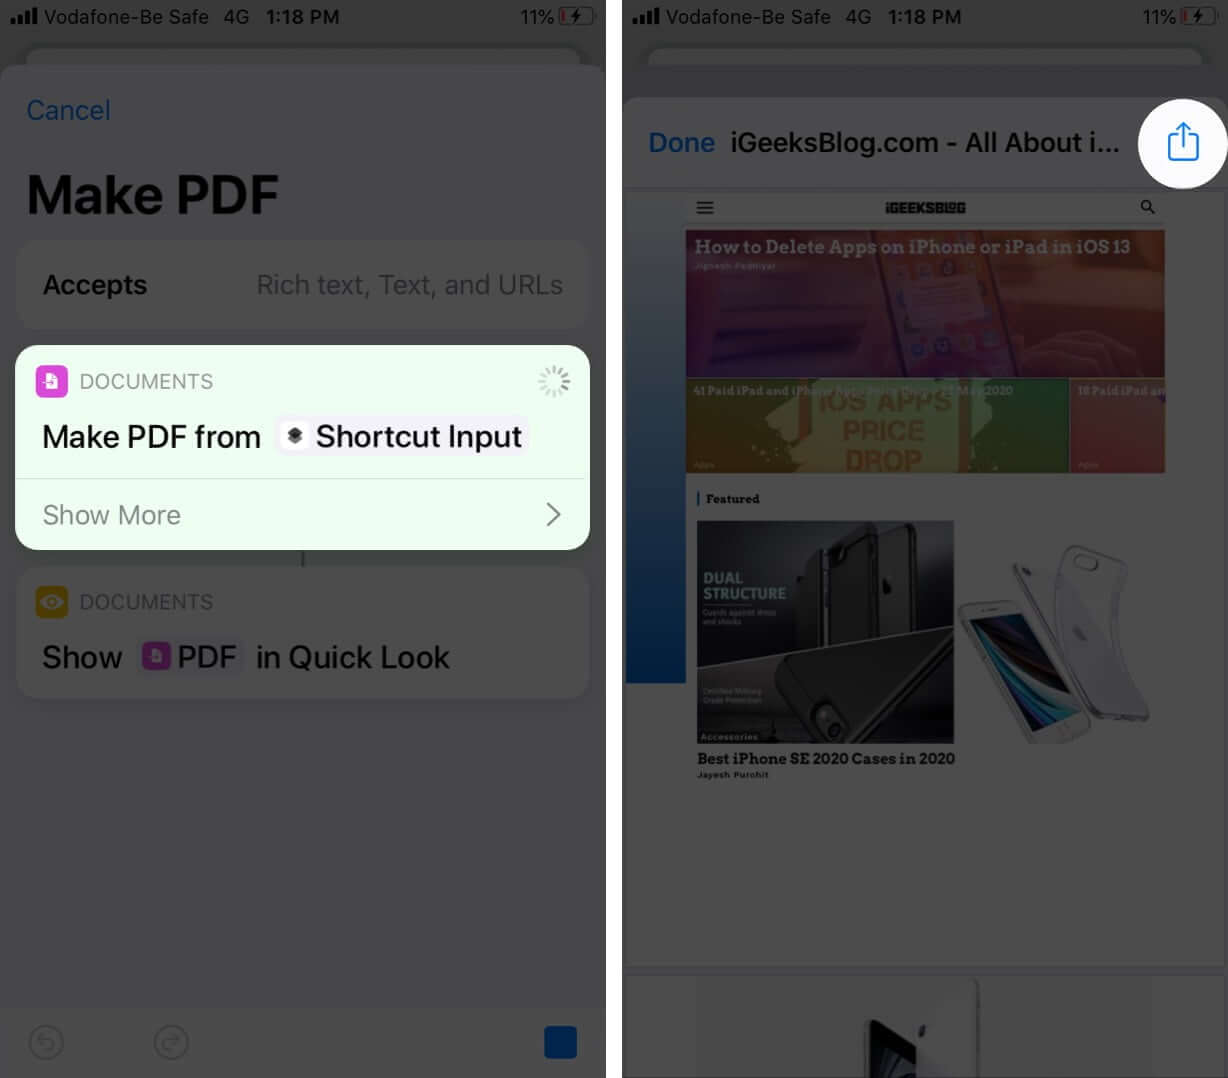 Tap on Share in Shortcuts App on iPhone